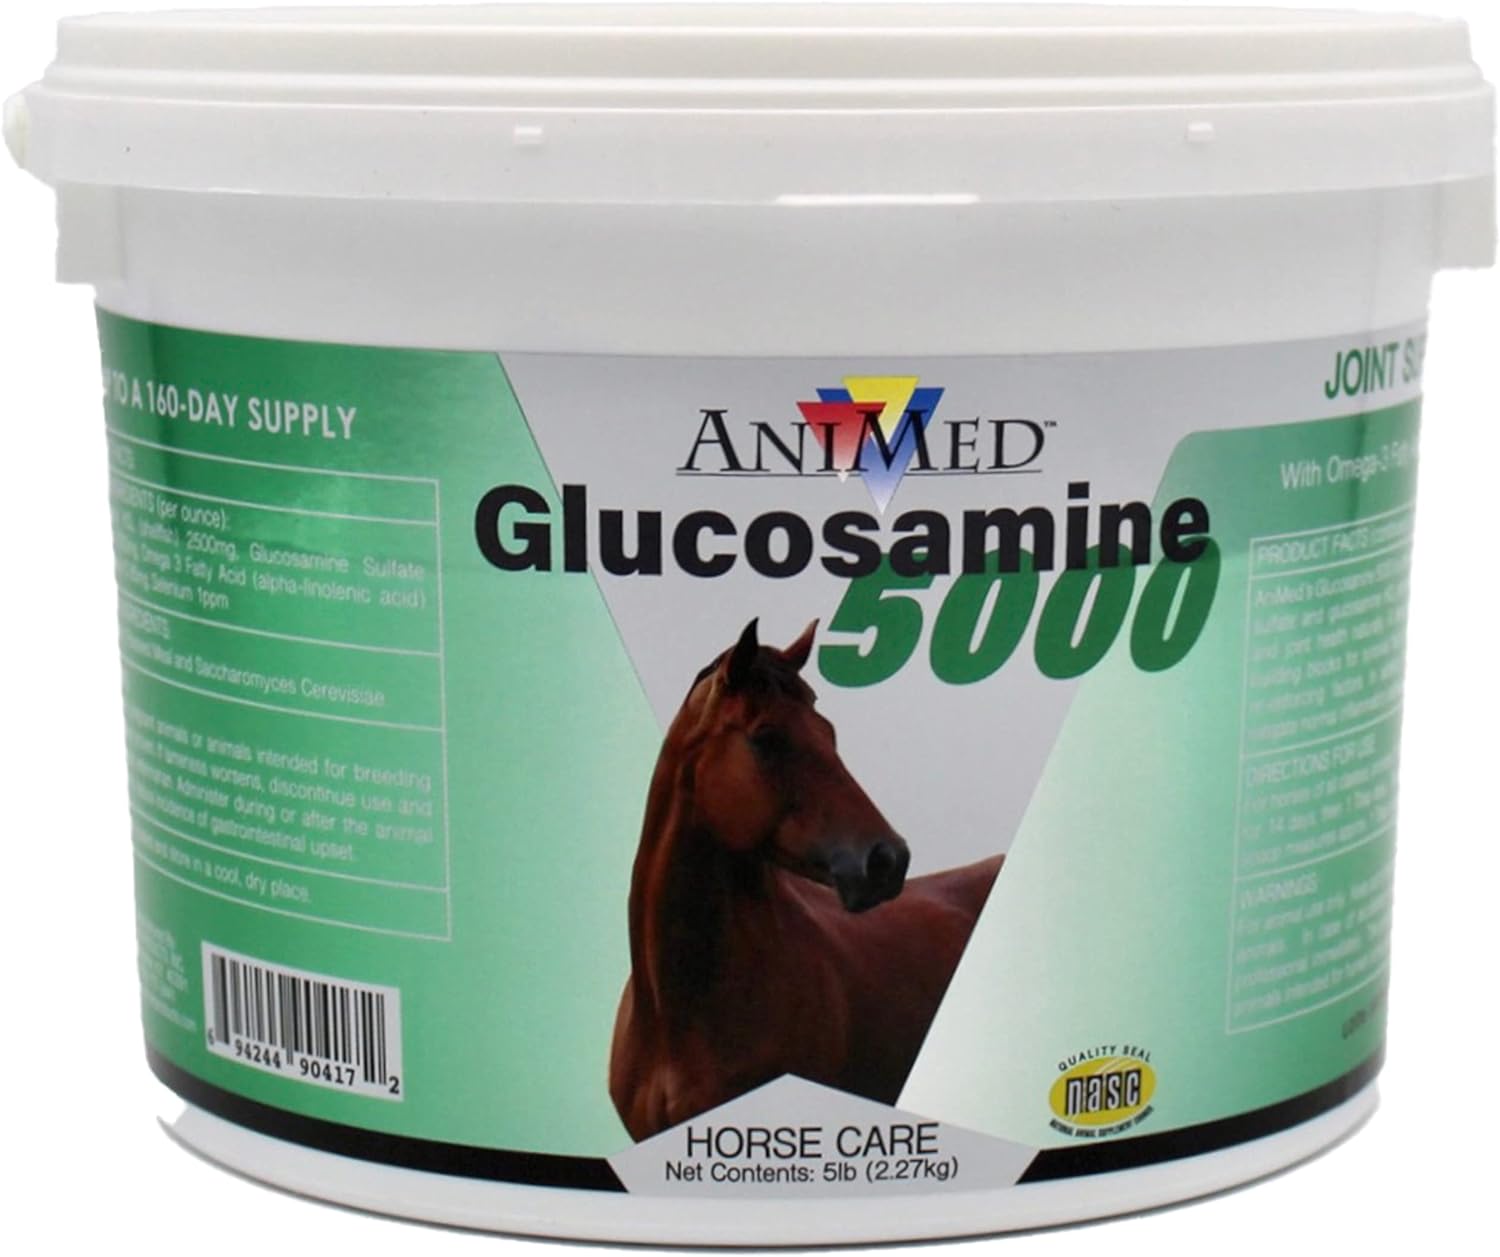 ANIMED Glucosamine 5000 - Natural Joint Health Supplement with Omega 3, Antioxidant Protection, and Digestive Support for Horses, 5 lbs… : Horse Nutritional Supplements And Remedies : Pet Supplies